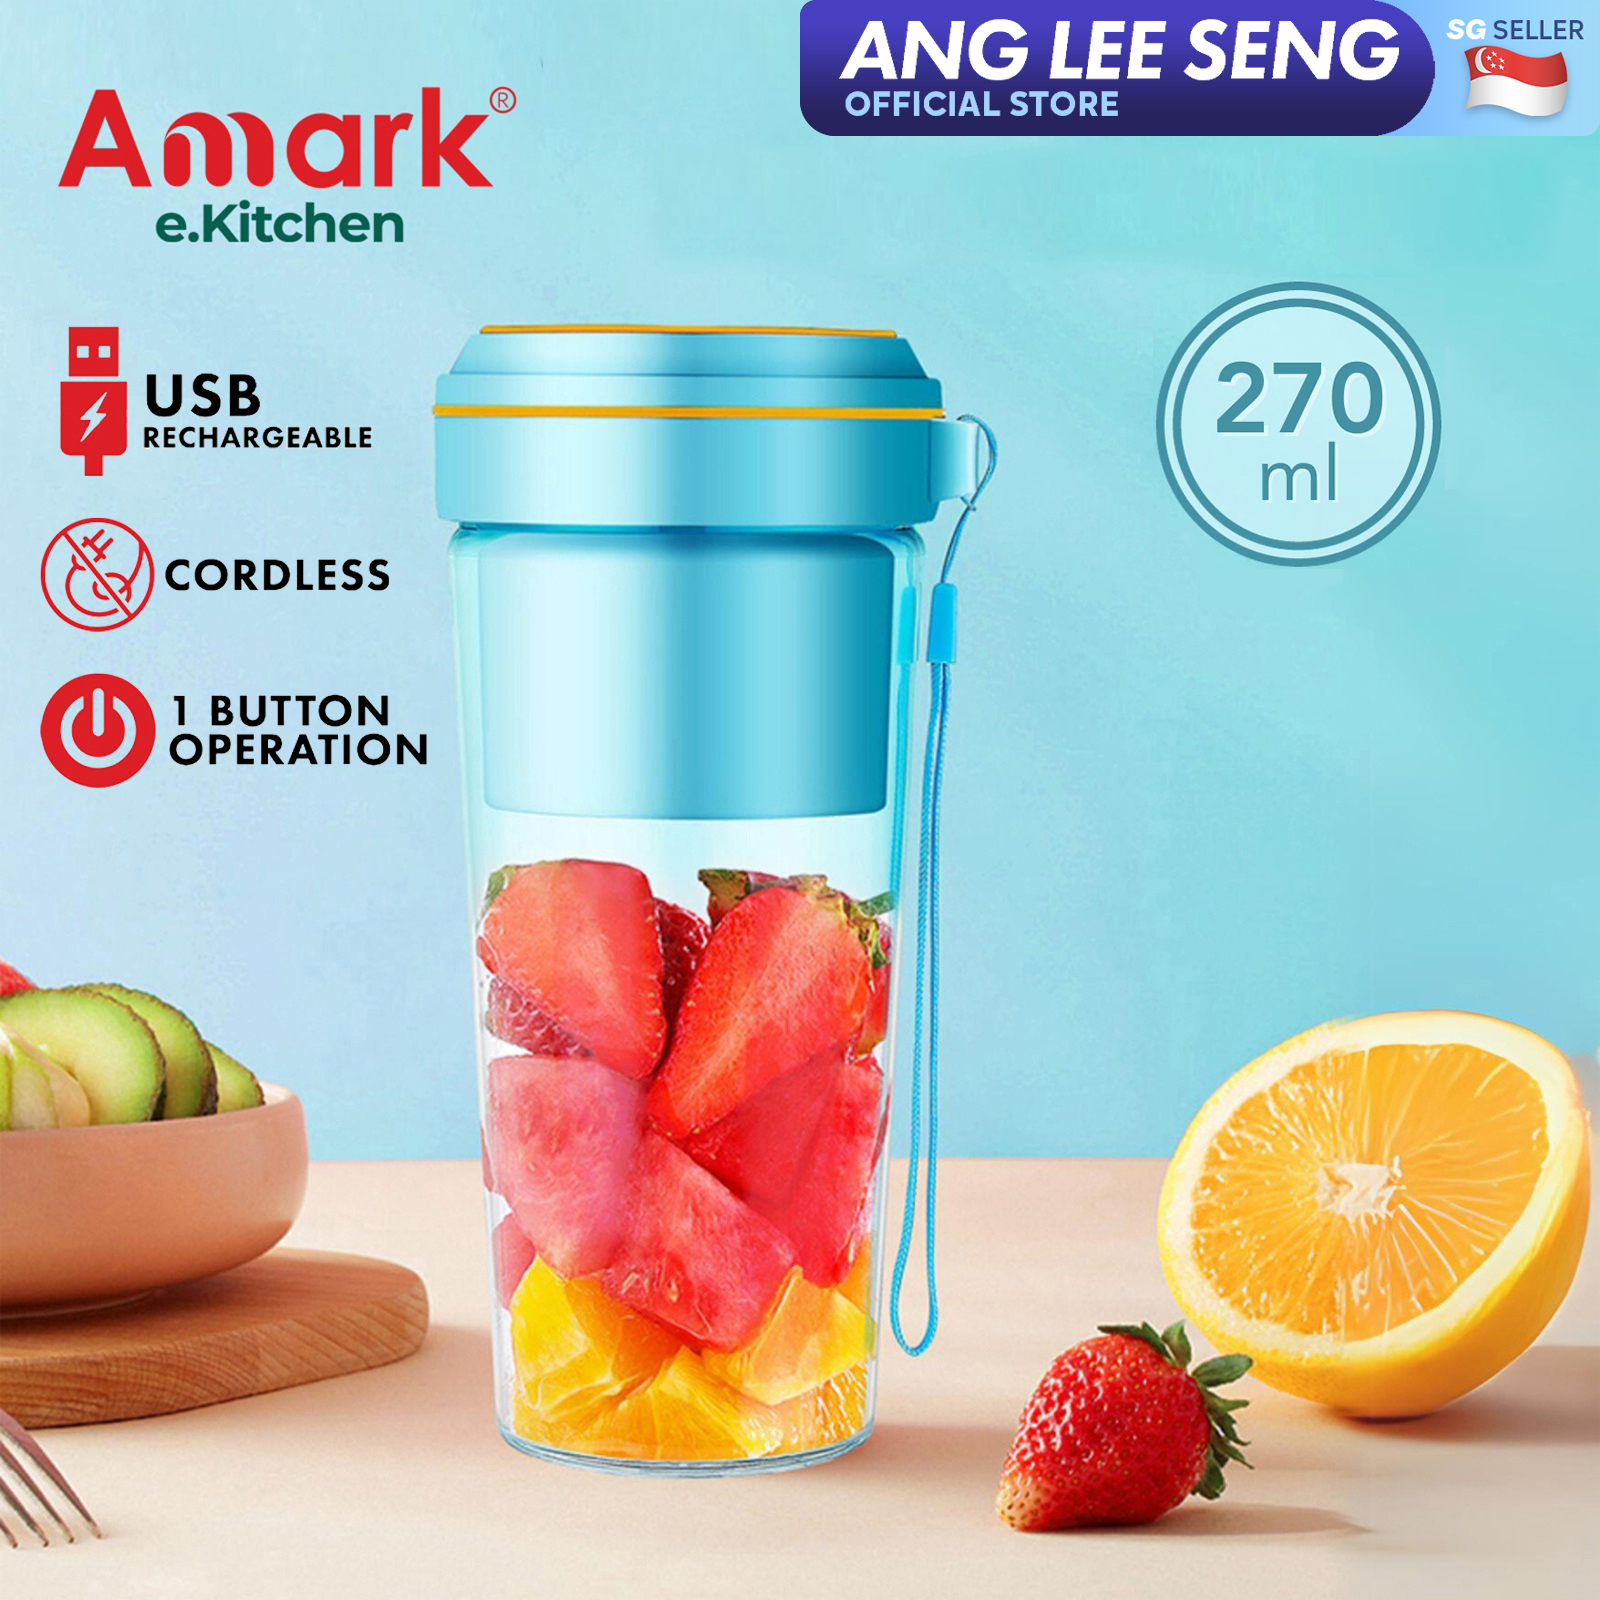 Amark e.Kitchen Cordless USB-Rechargeable Smoothie Blender Juicer Cup 270ml